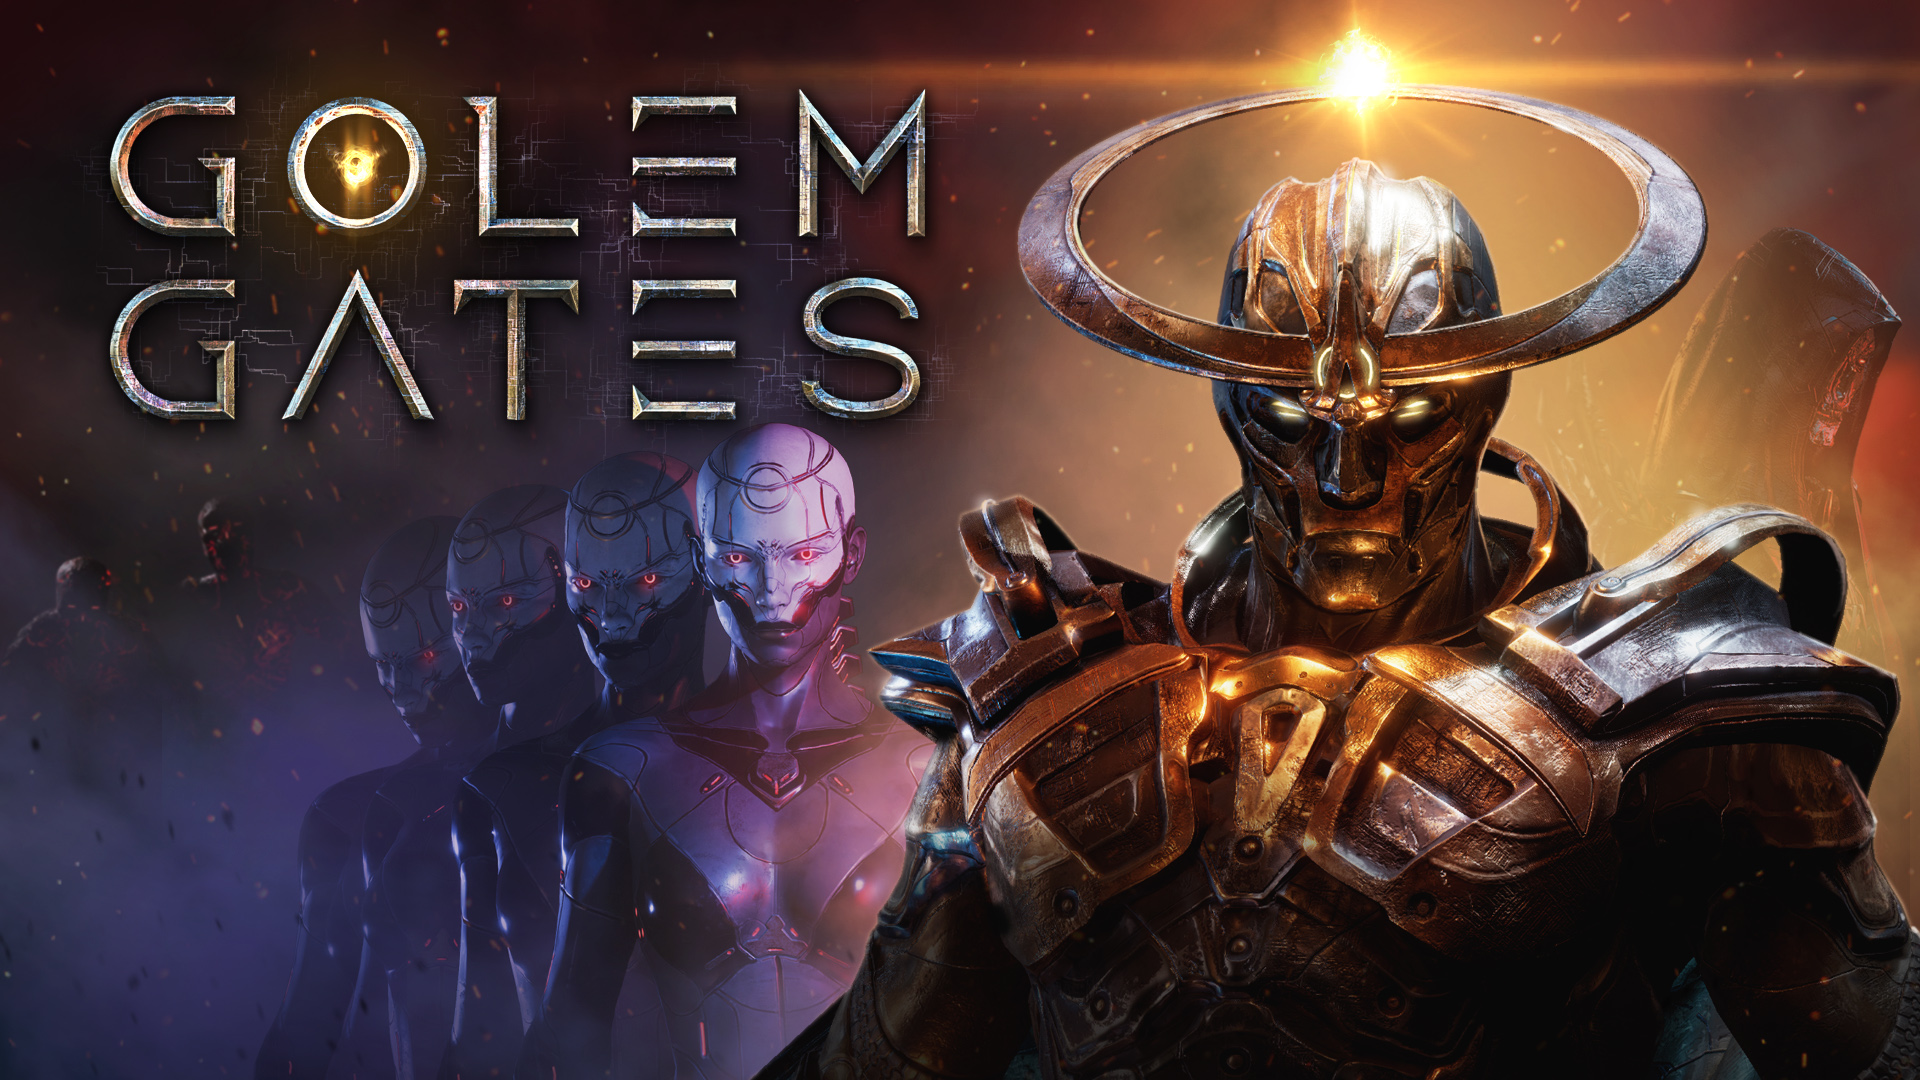 Golem Gates - Switch Review